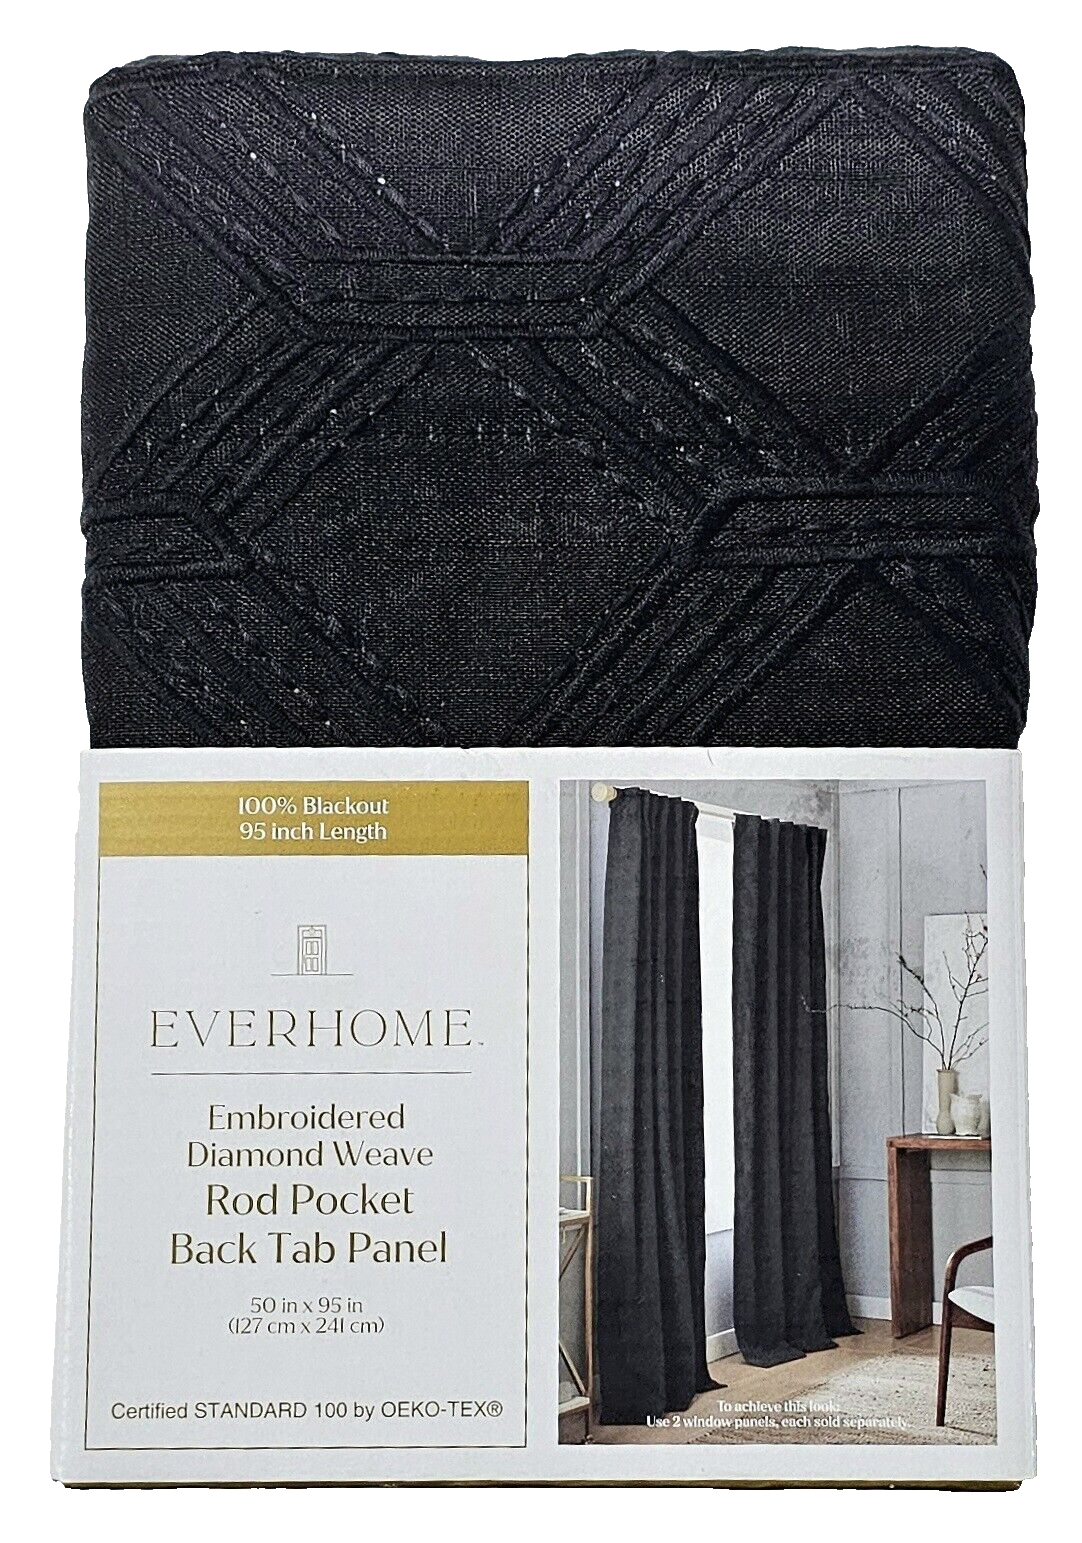 Primary image for Everhome Embroidered Diamond Weave Rod Pocket Back Tab Panel 50x95in Tuxedo